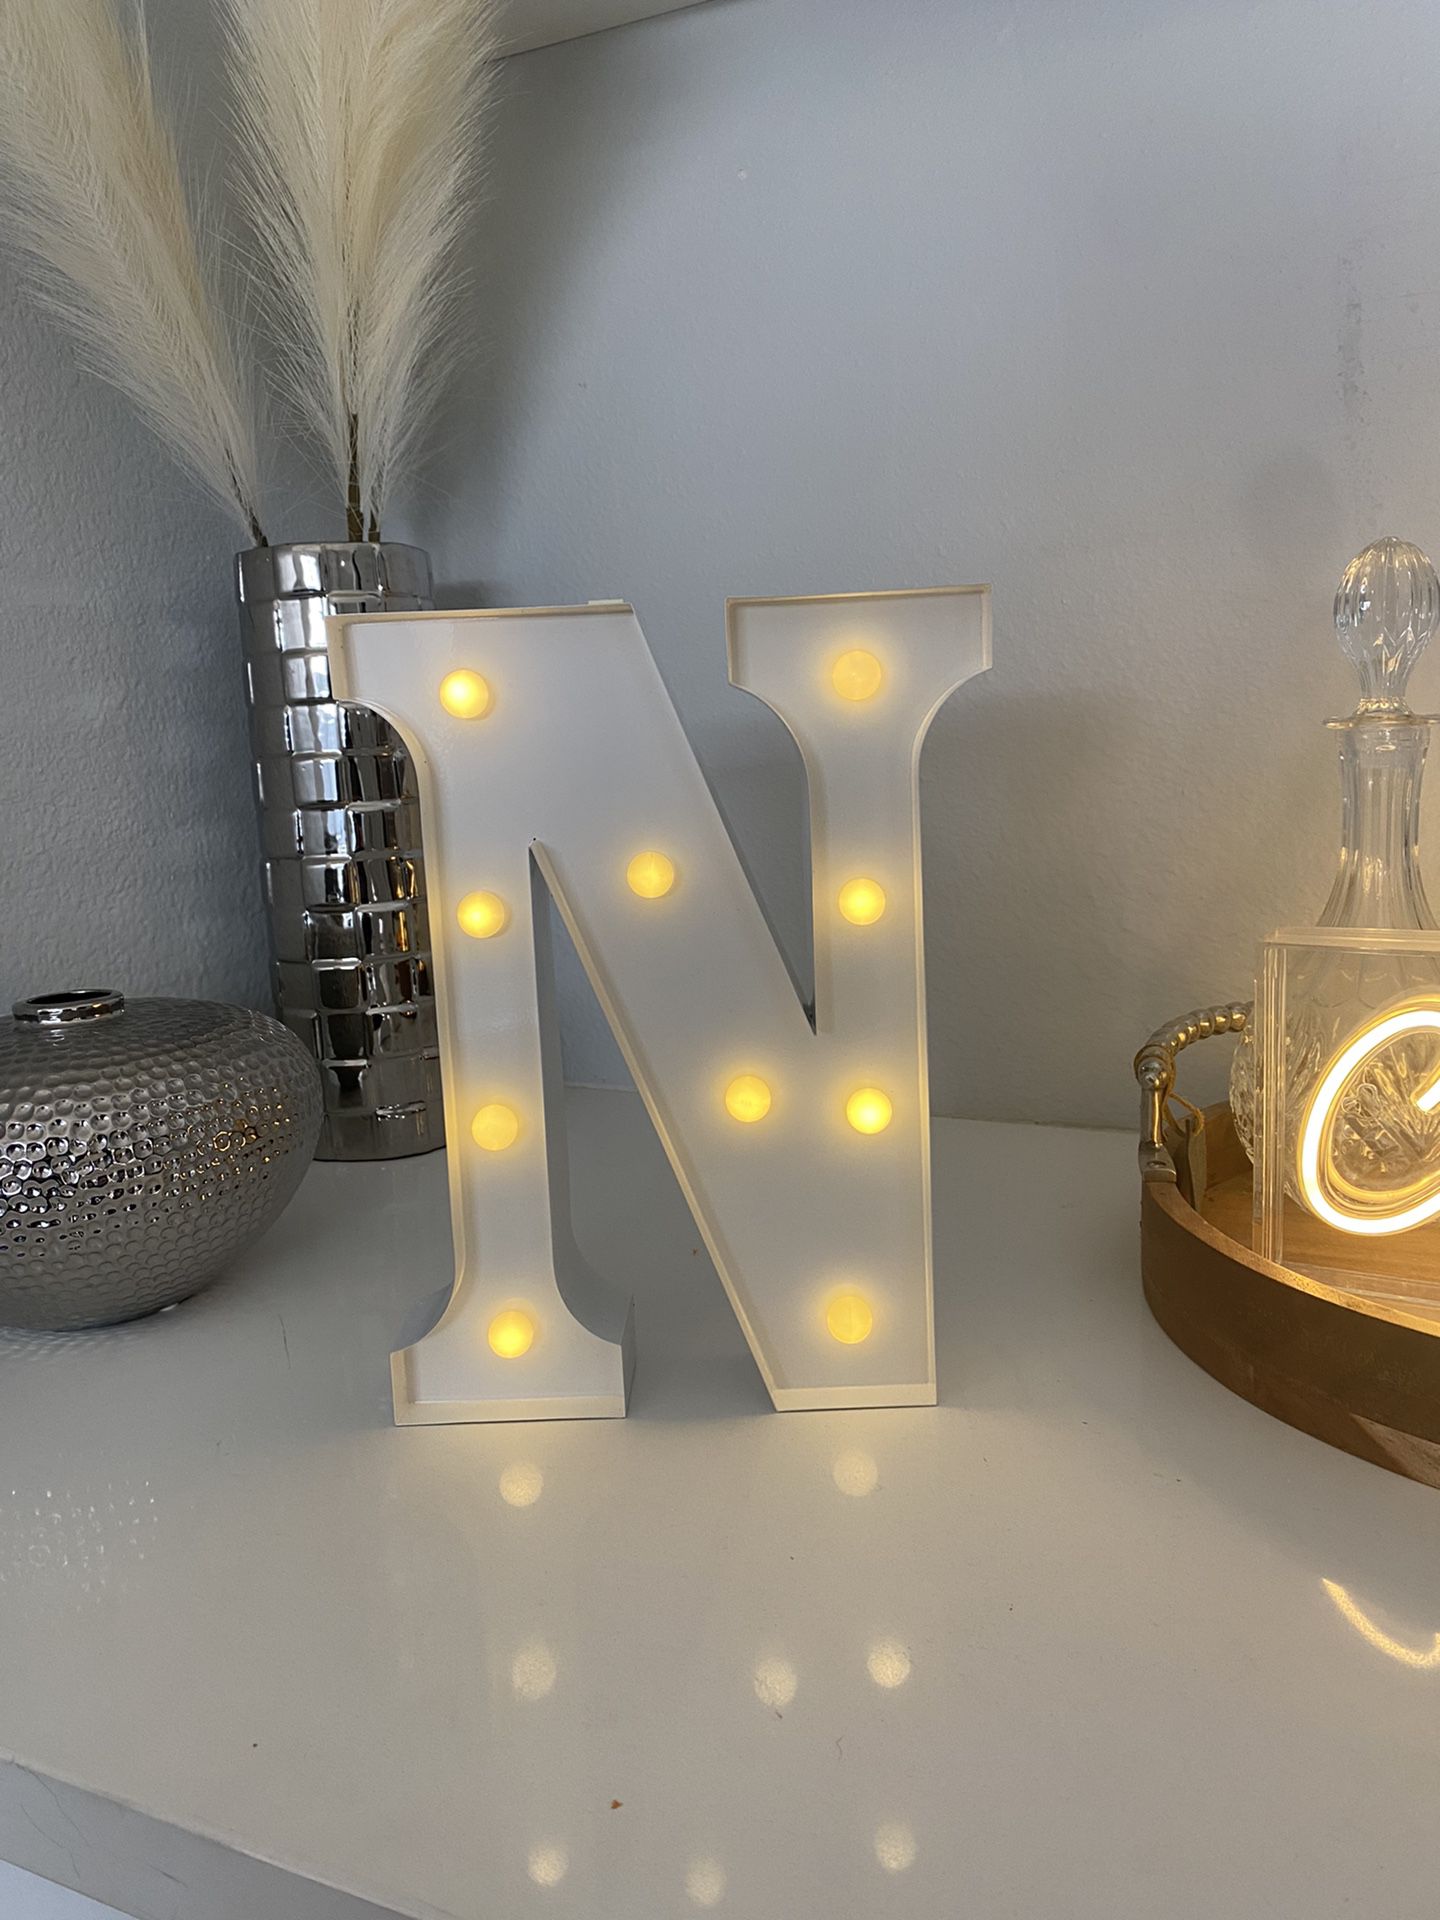 Marquee Letter “N”